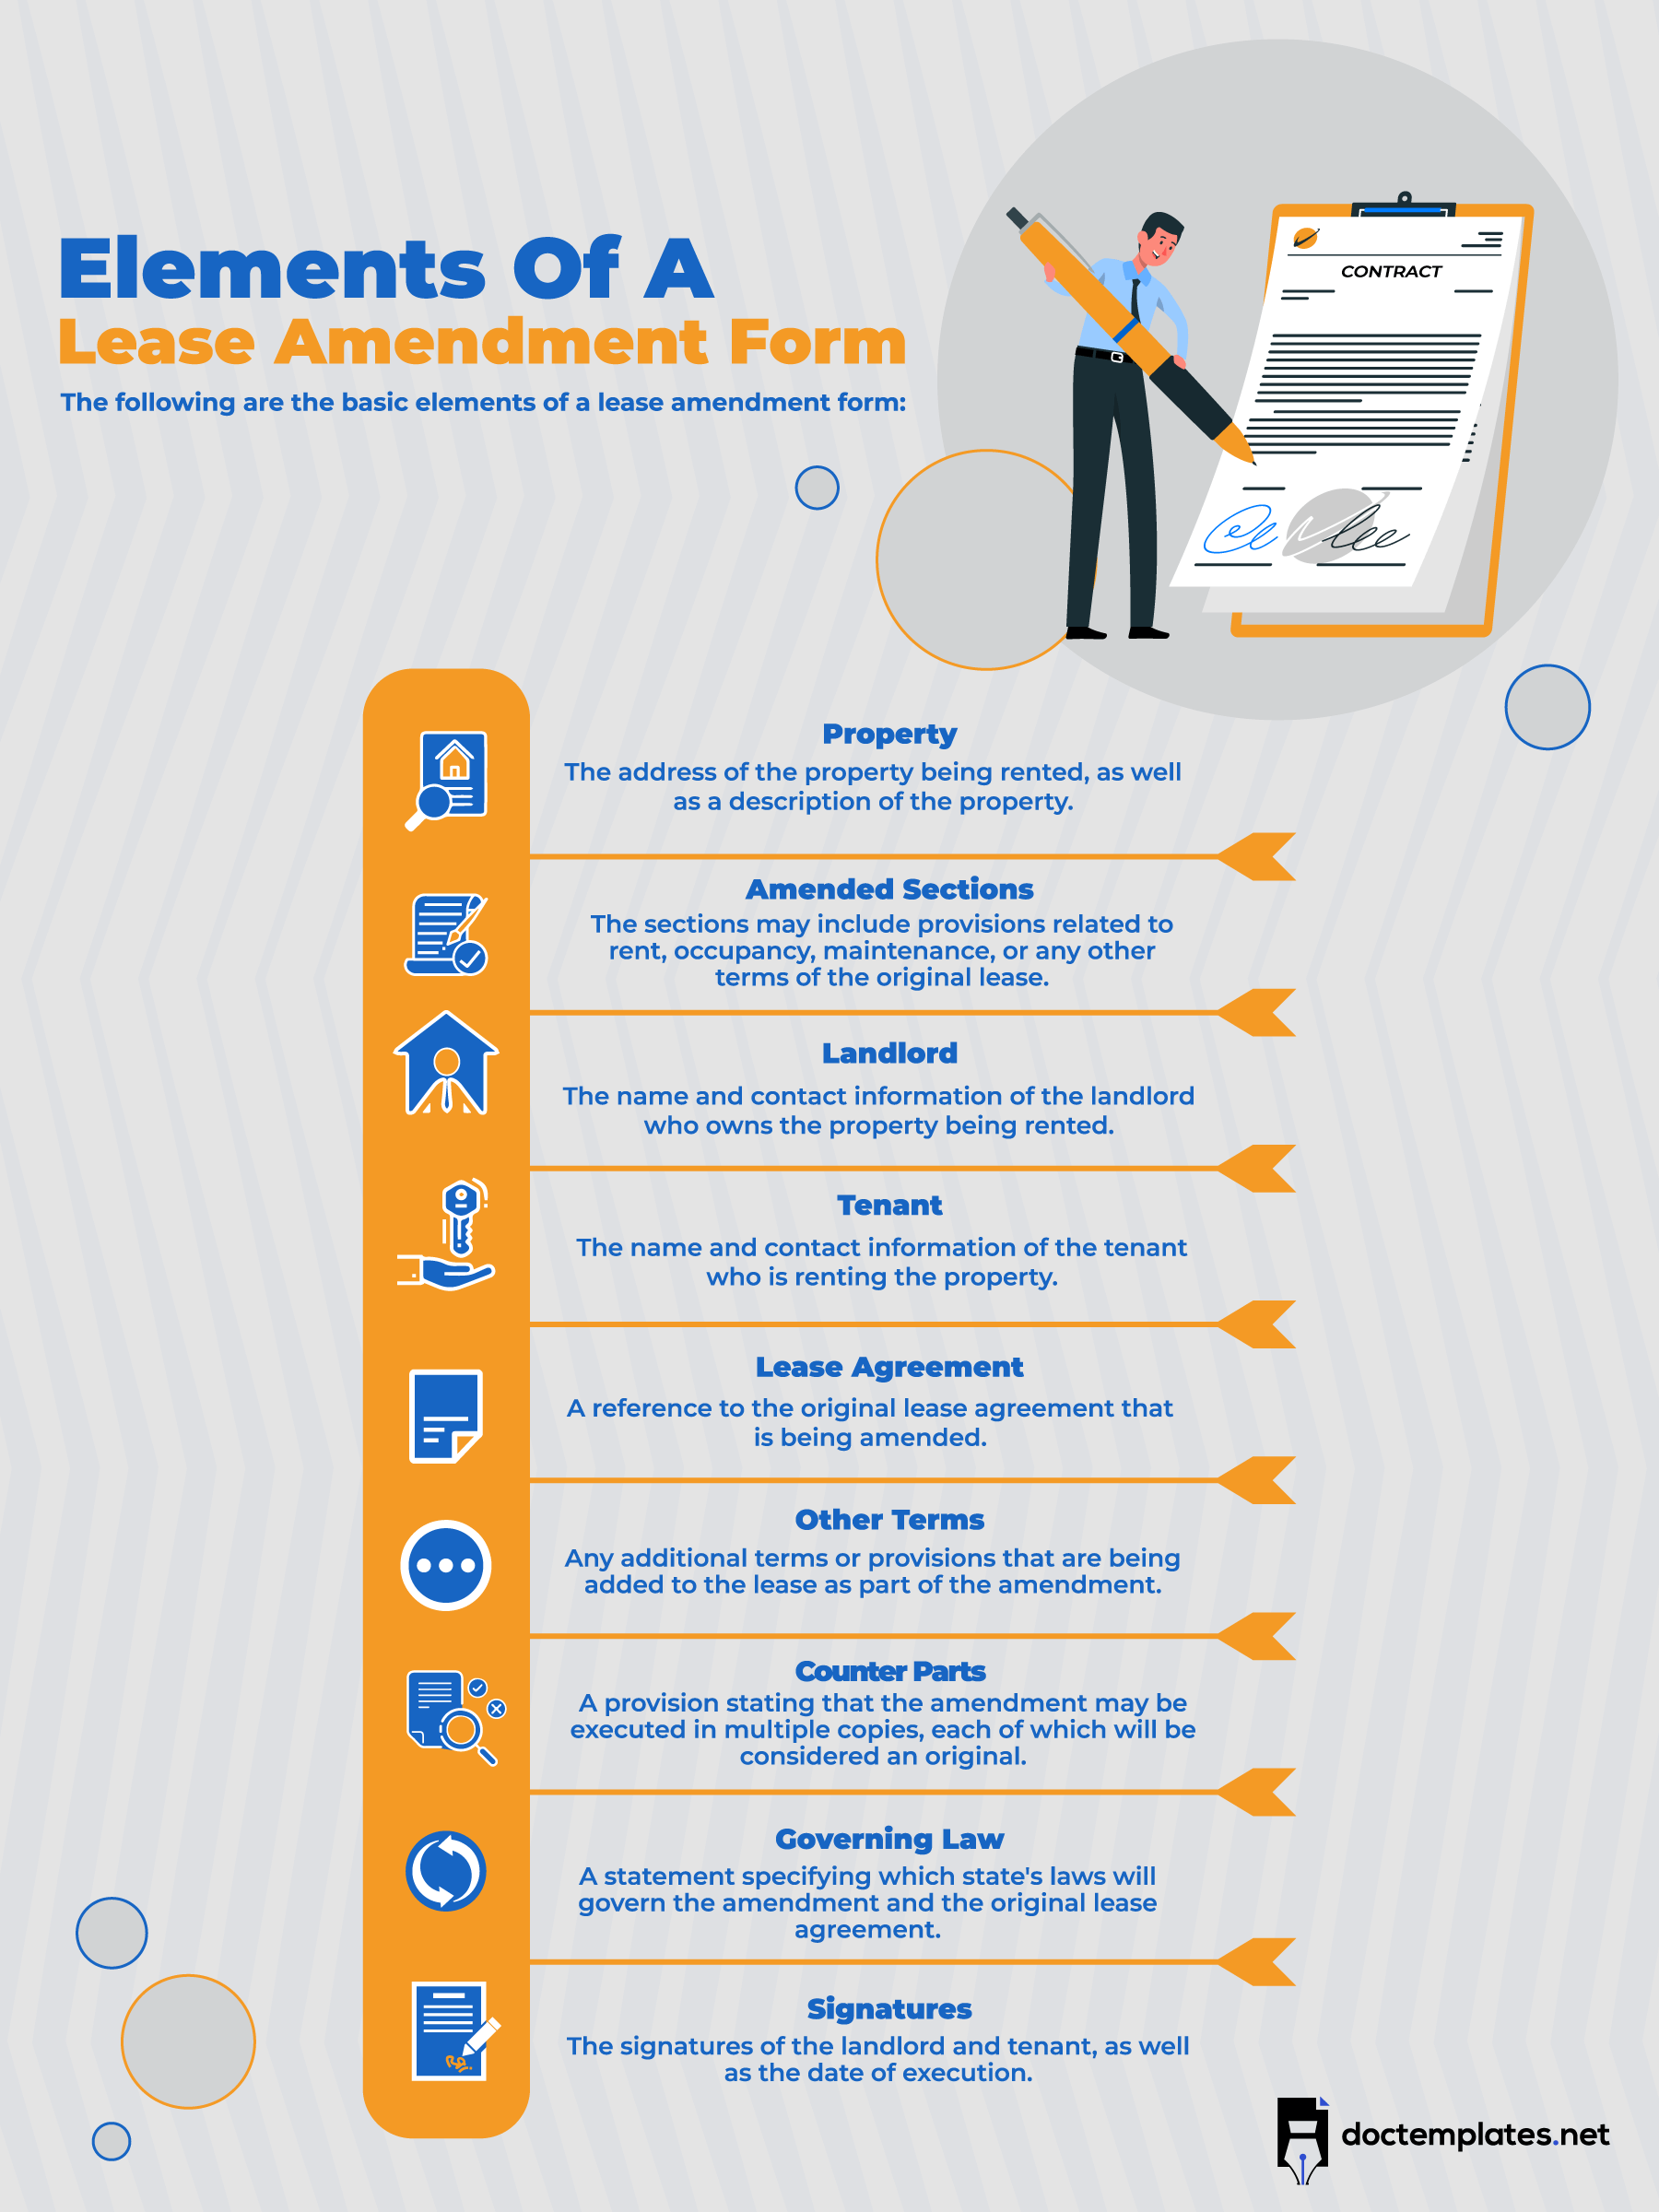 This infographic is about elements of lease amendment form.